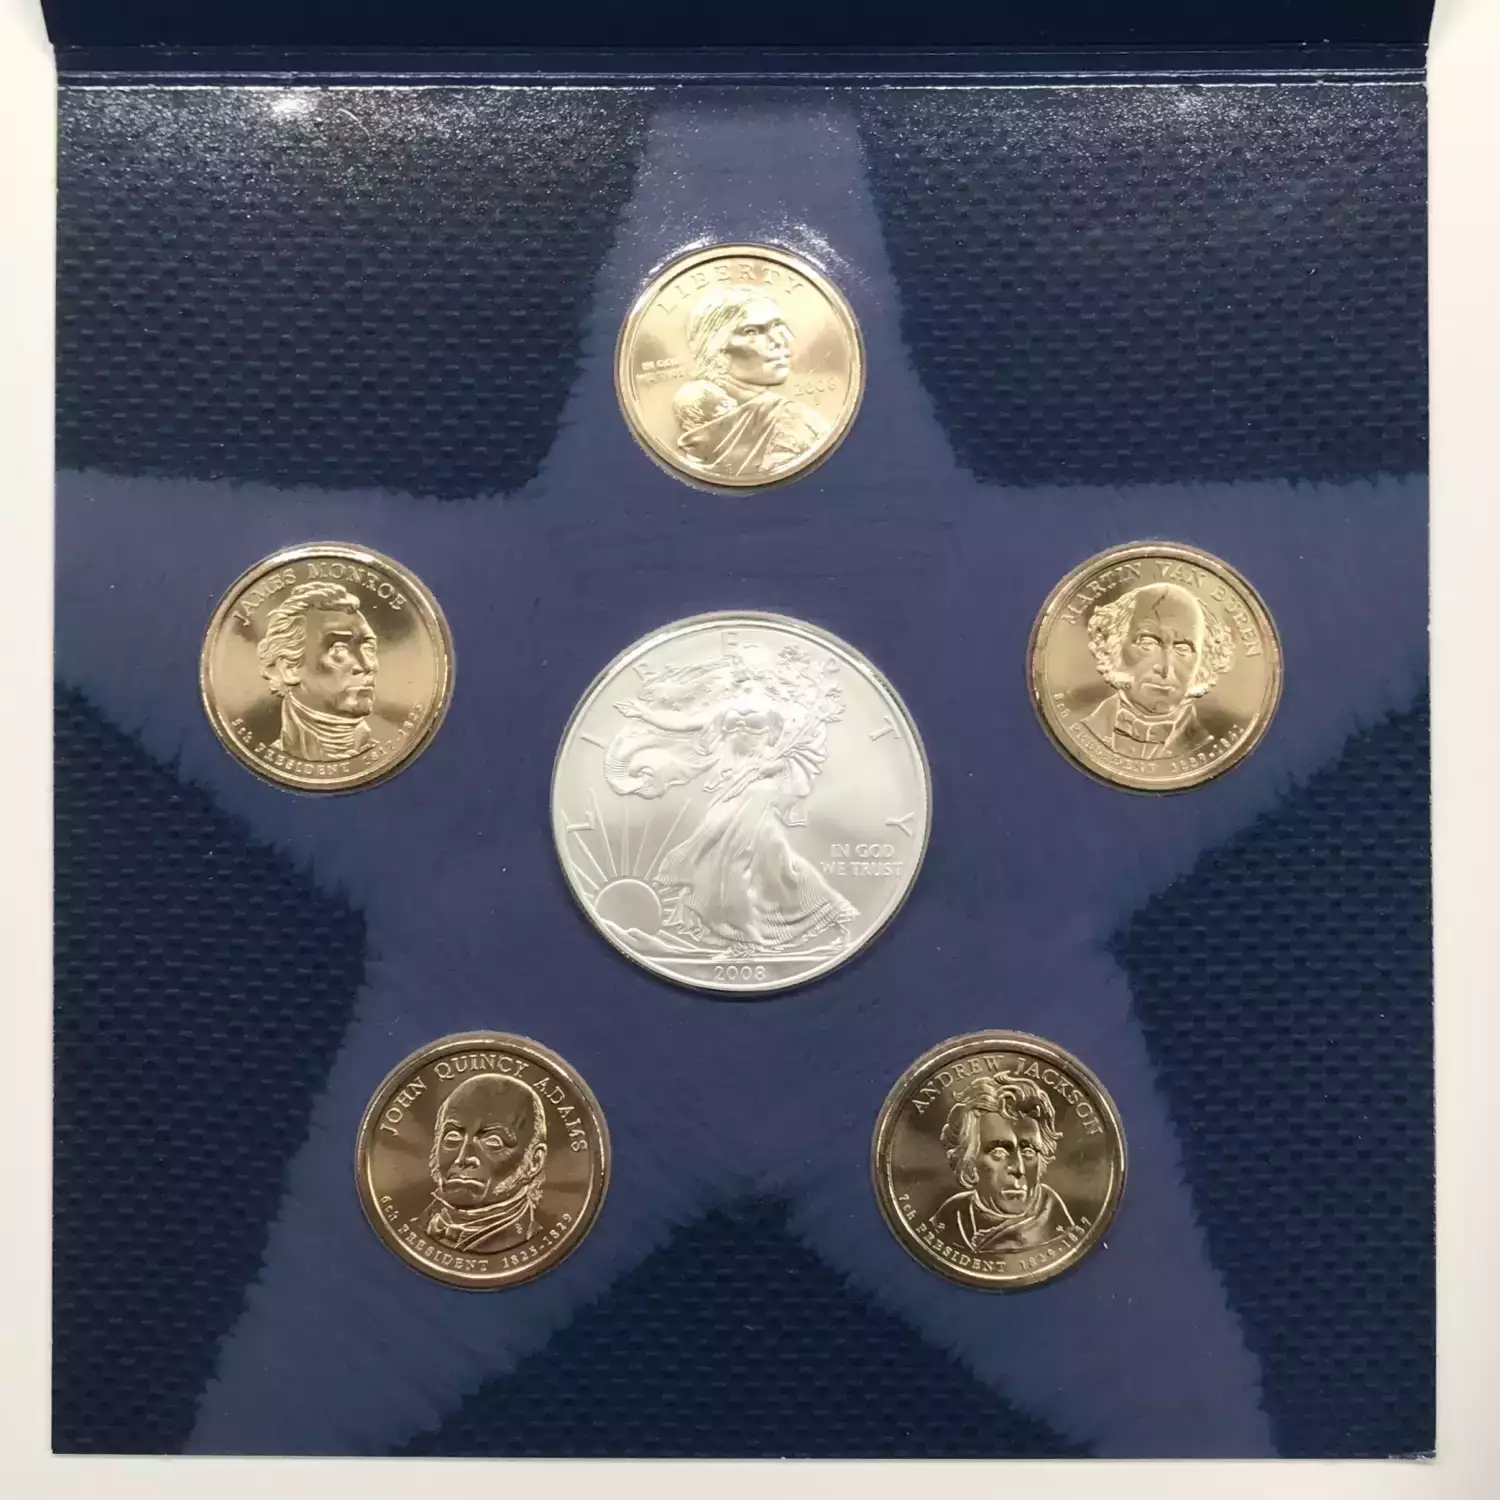 2008 Annual Uncirculated Dollar Coin Set incl W Burnished Silver Eagle - US Mint (2)